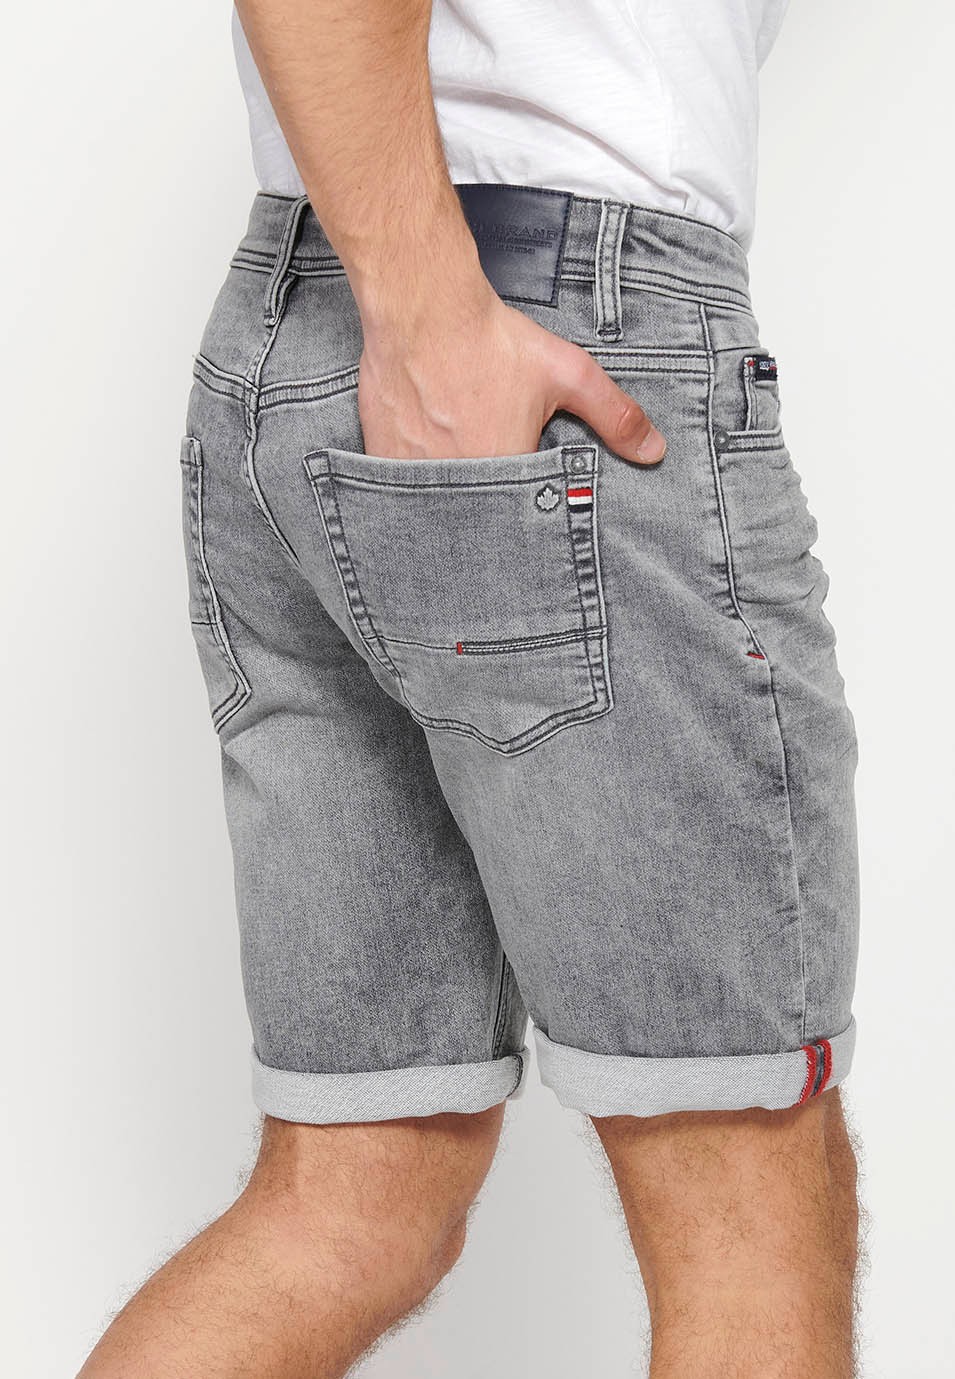 Denim shorts with front closure with zipper and button with five pockets, one pocket in Gray Denim Color for Men